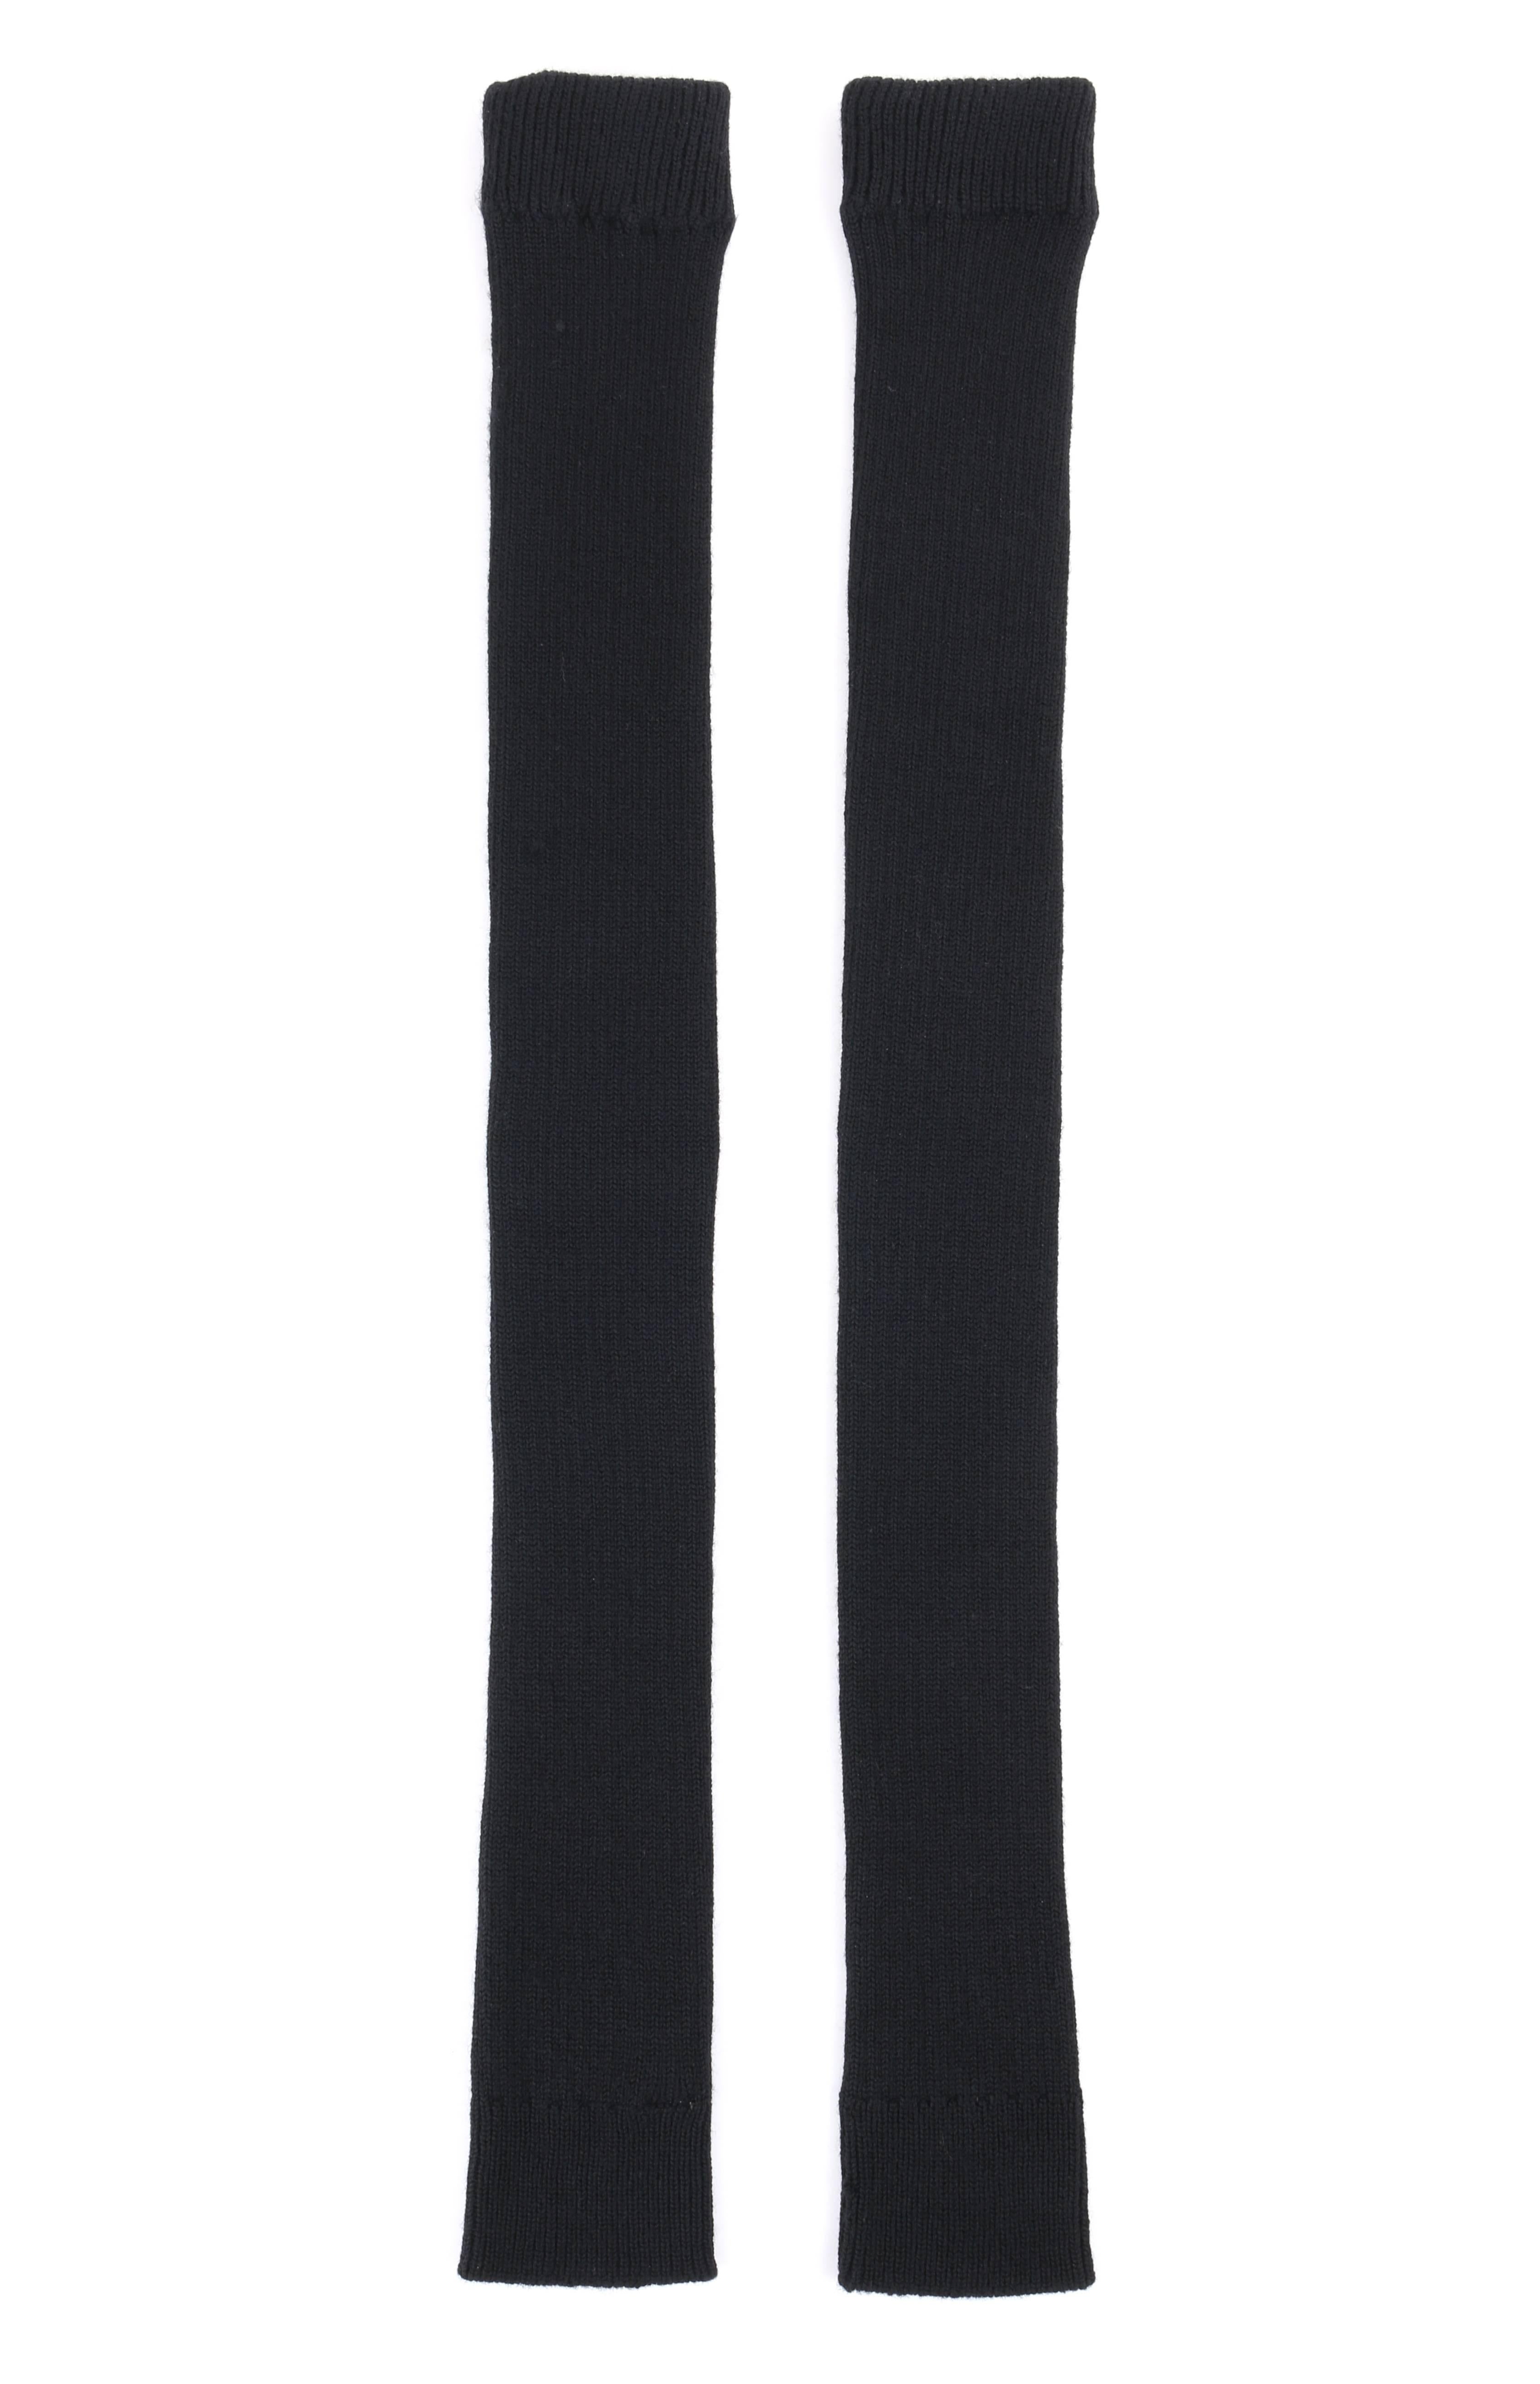 JUNYA WANTANABE for COMME DES GARCONS A/W 2005 Black Wool Knit Leg / Arm Warmers 2